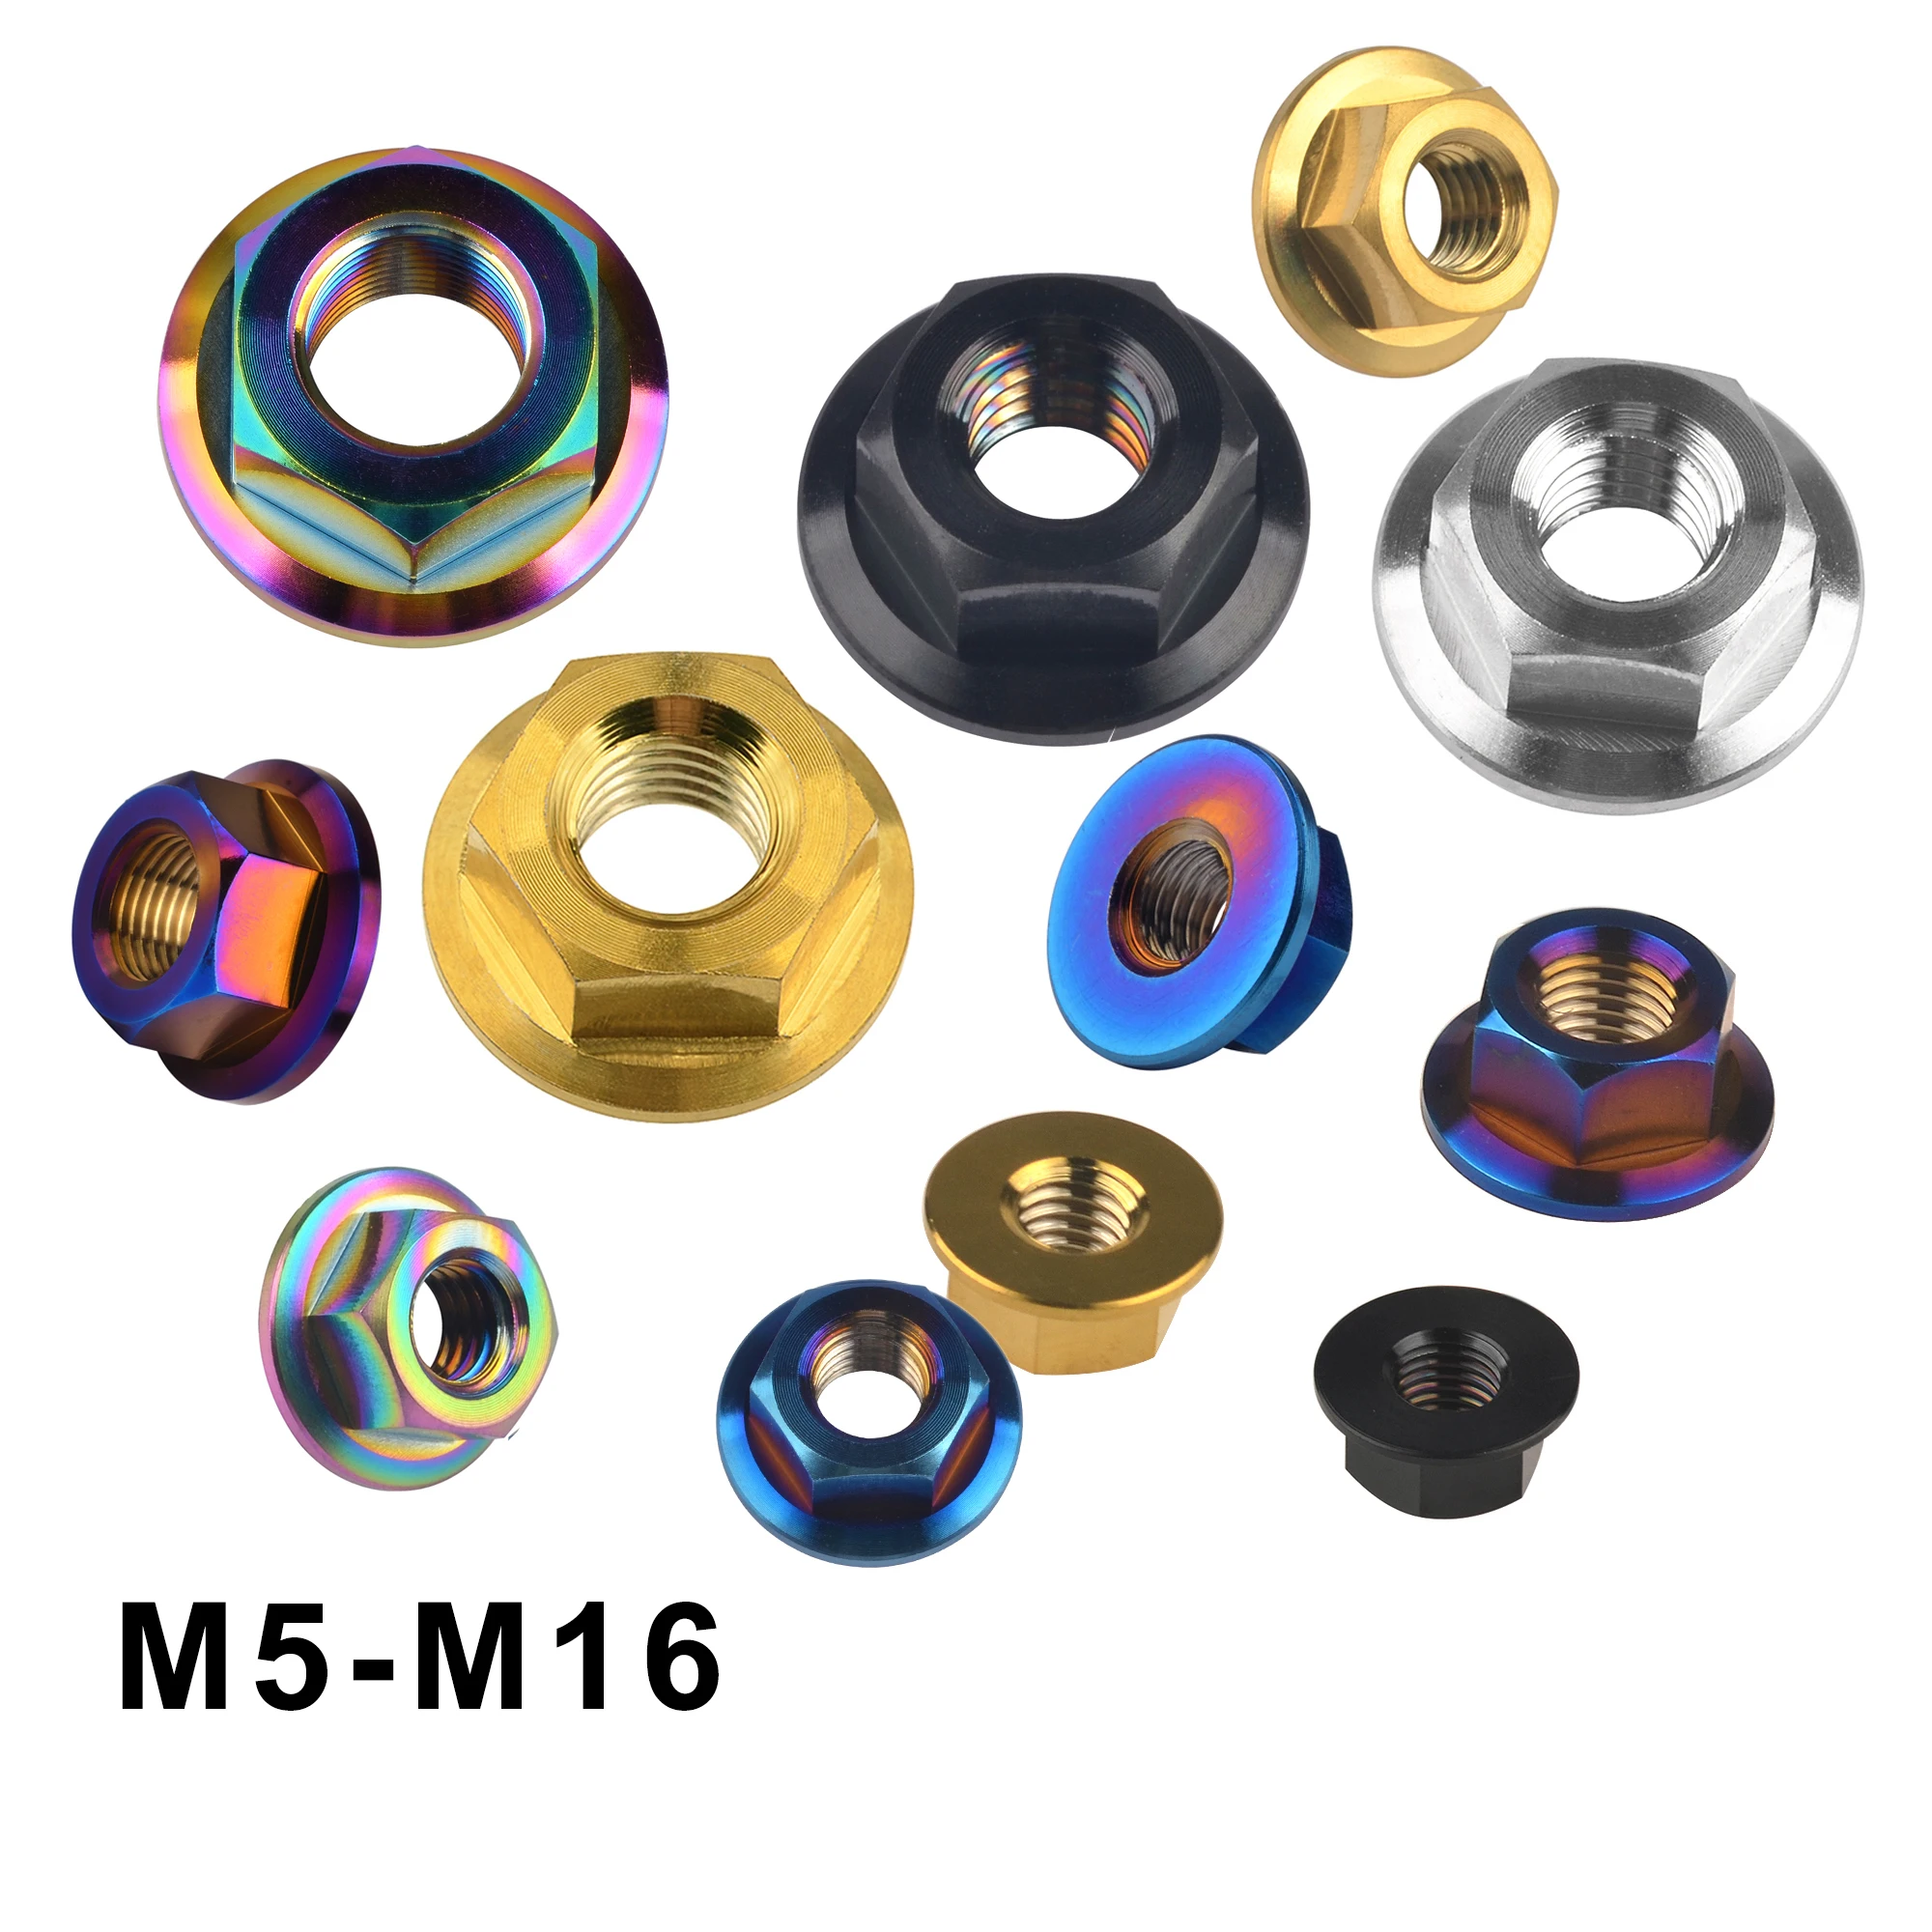 Weiqijie Titanium Nut M5 M6 M8 M10 M12 M14 M16  Flange Nut Accessories for Bicycle Motorcycle Car